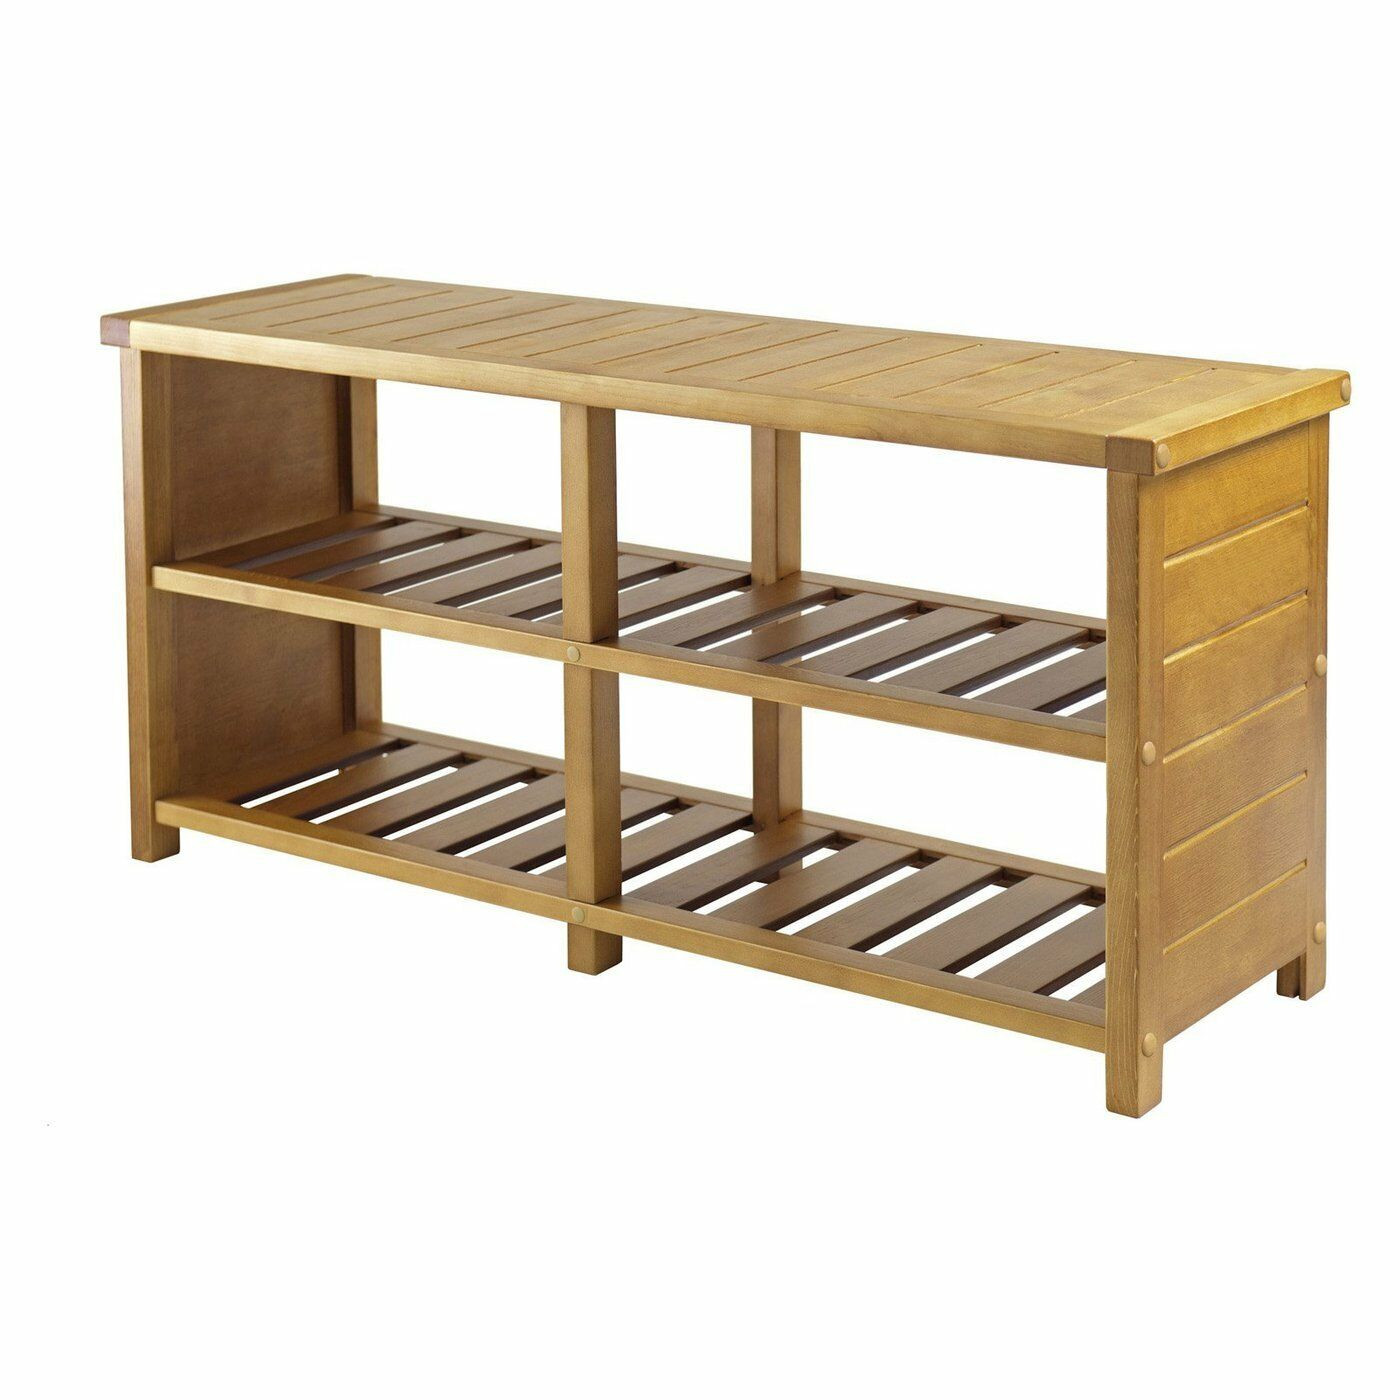 Bench With Shoe Storage
 Shoe Storage Bench Wood Organizer Accent Rack Entryway